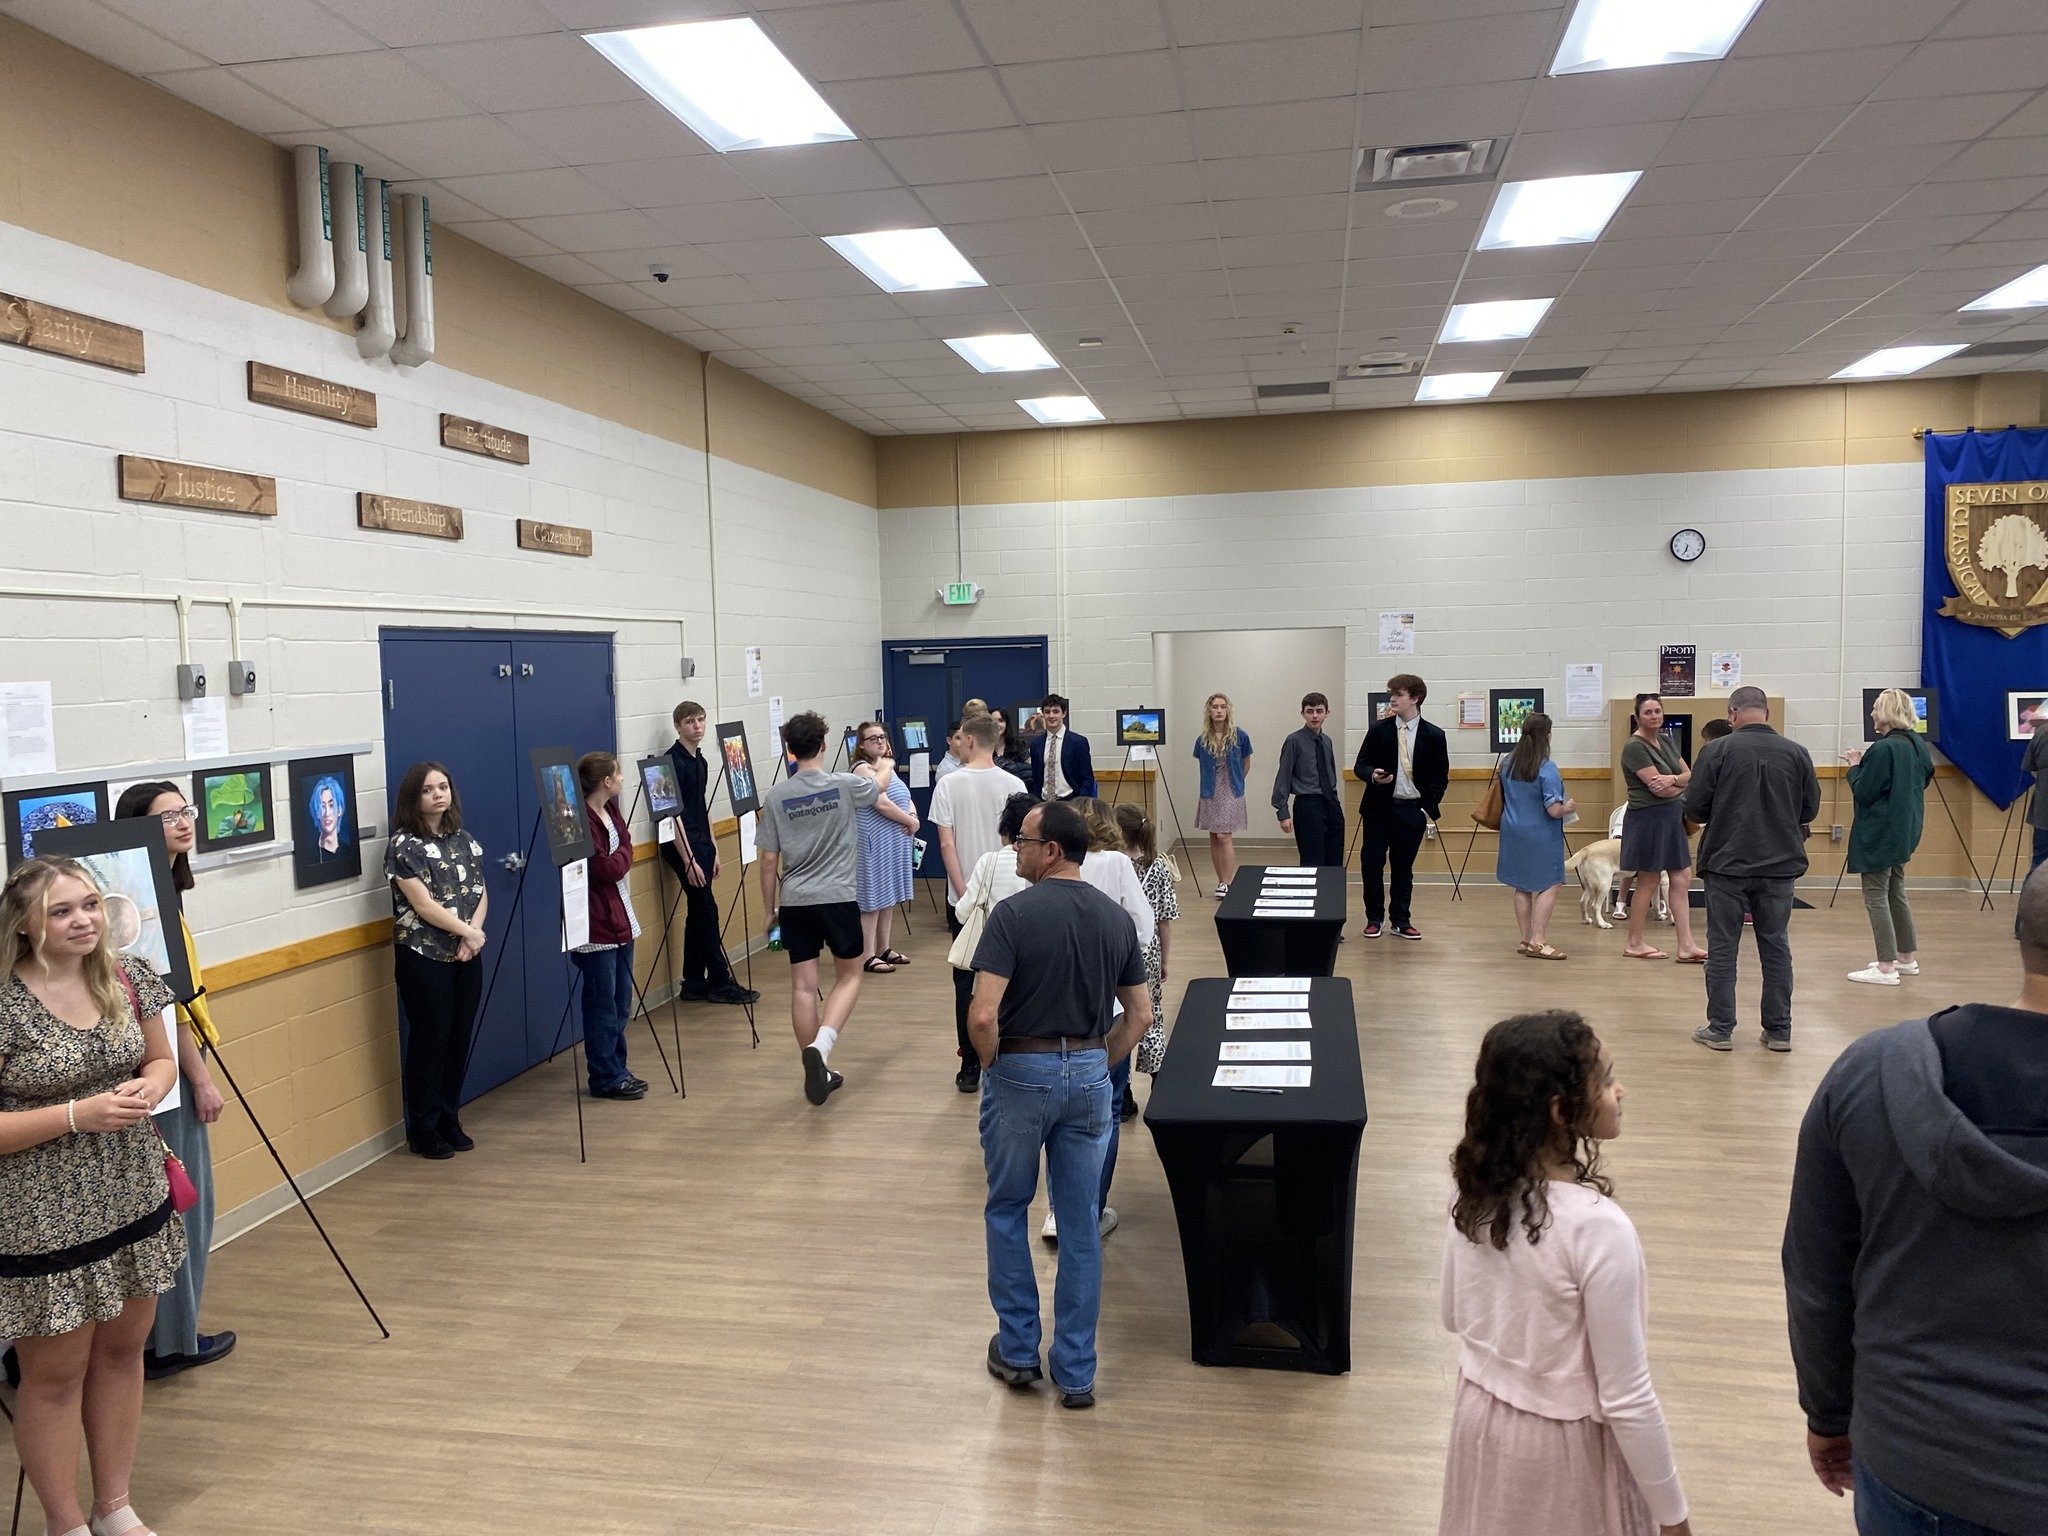 The art teachers and students want to thank the family and friends of Seven Oaks for the support of the fine arts during Arts Night on Saturday, April 13! The event featured over 150 works of art from students in grades 6-12. The evening included a s